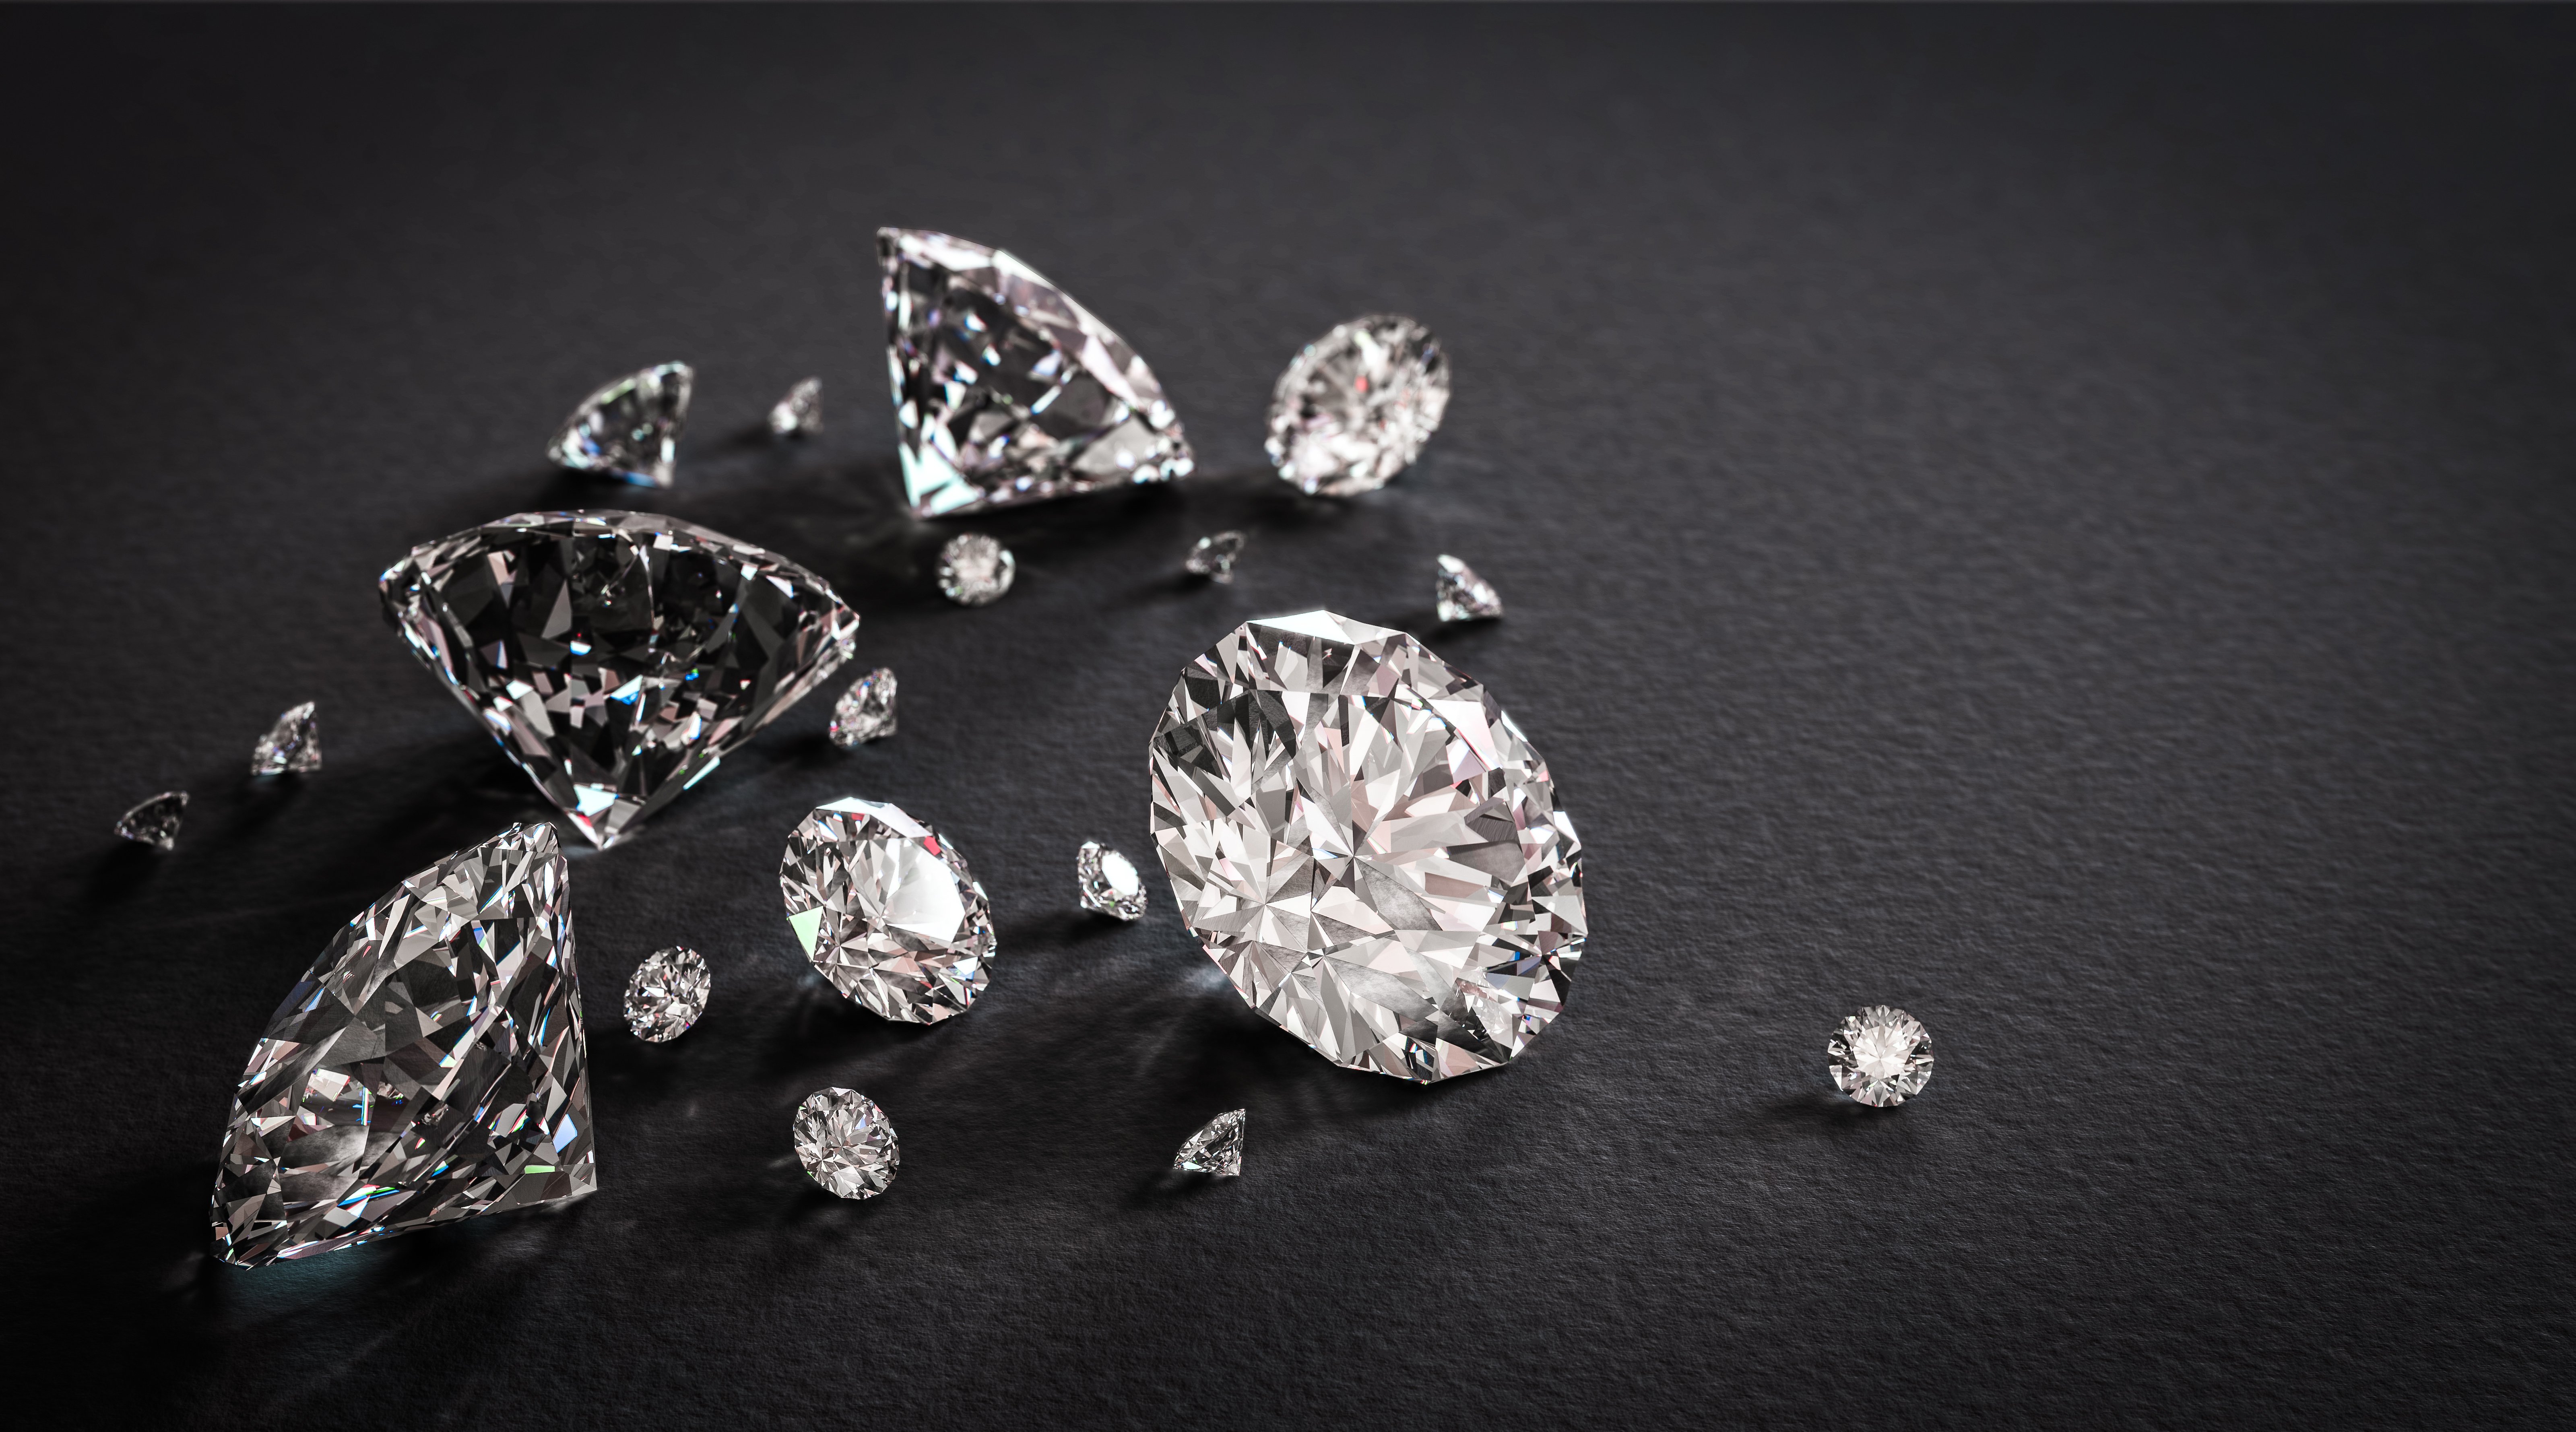 Diamond cuts are important. Jewellers are turning to special cut diamonds to make their pieces stand out.